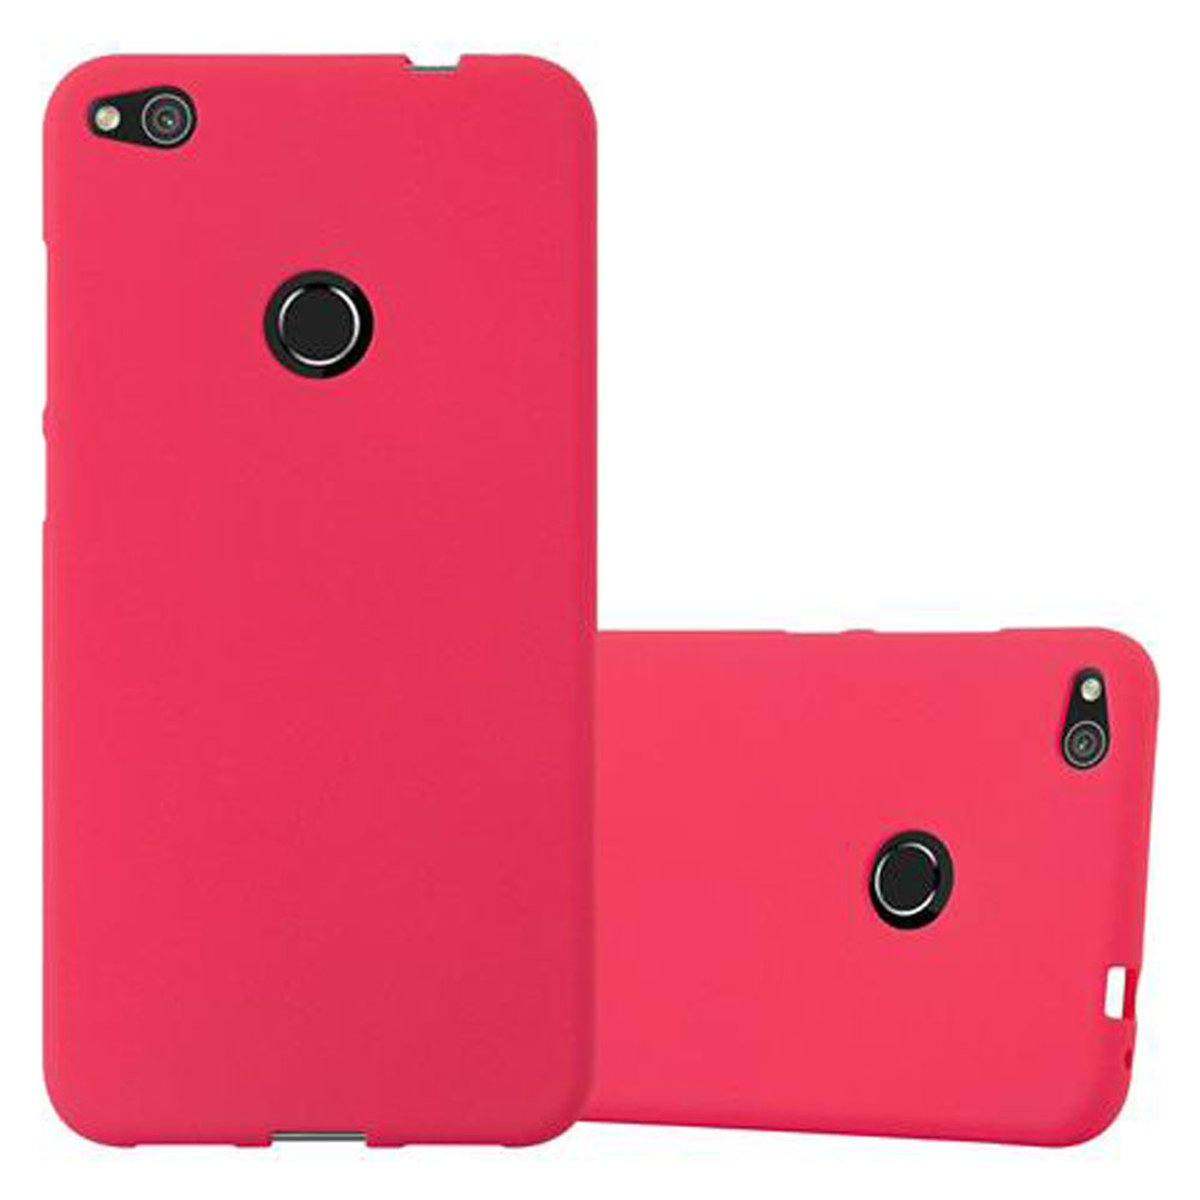 CADORABO TPU Frosted Schutzhülle, / FROST P8 P9 2017, LITE 2017 LITE Huawei, ROT Backcover